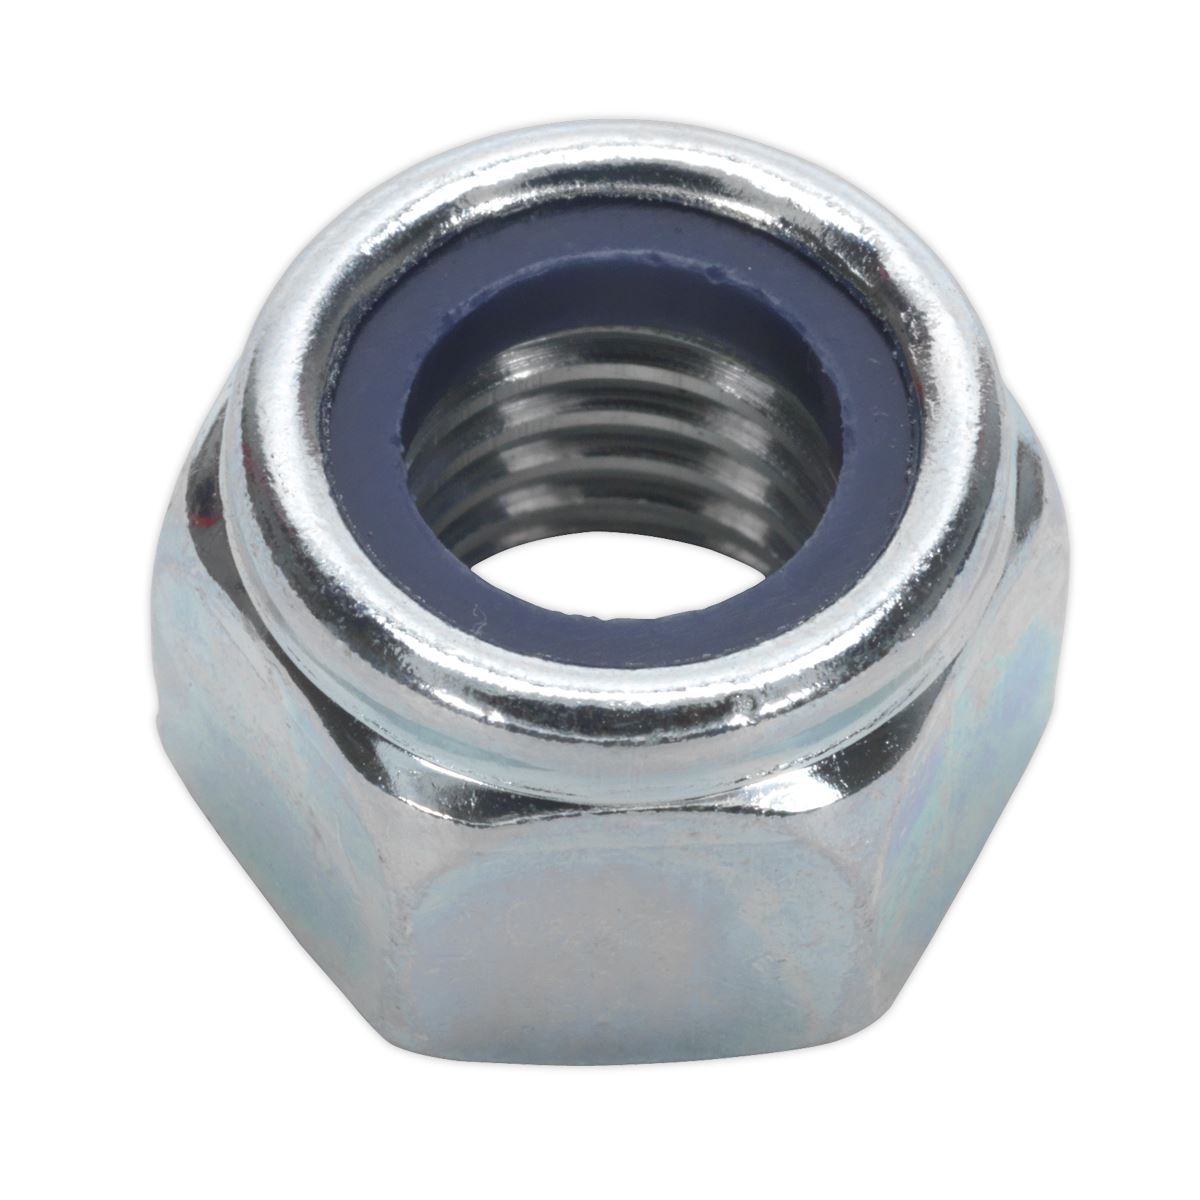 Sealey 25 Pack M12 Zinc Plated Nylon Lock Nuts DIN 982 1.75 Pitch